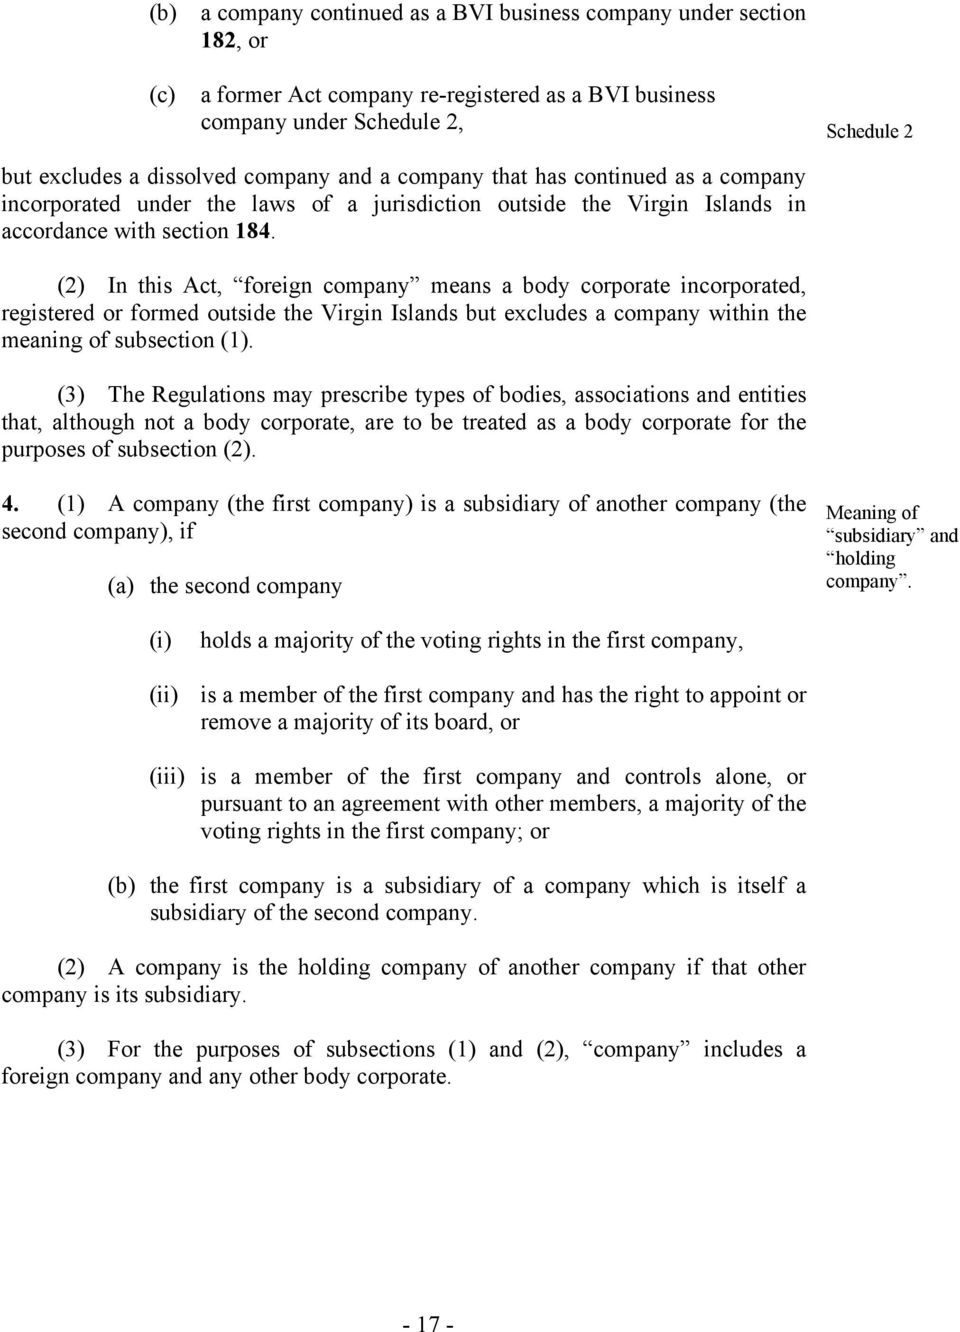 (2) In this Act, foreign company means a body corporate incorporated, registered or formed outside the Virgin Islands but excludes a company within the meaning of subsection (1).